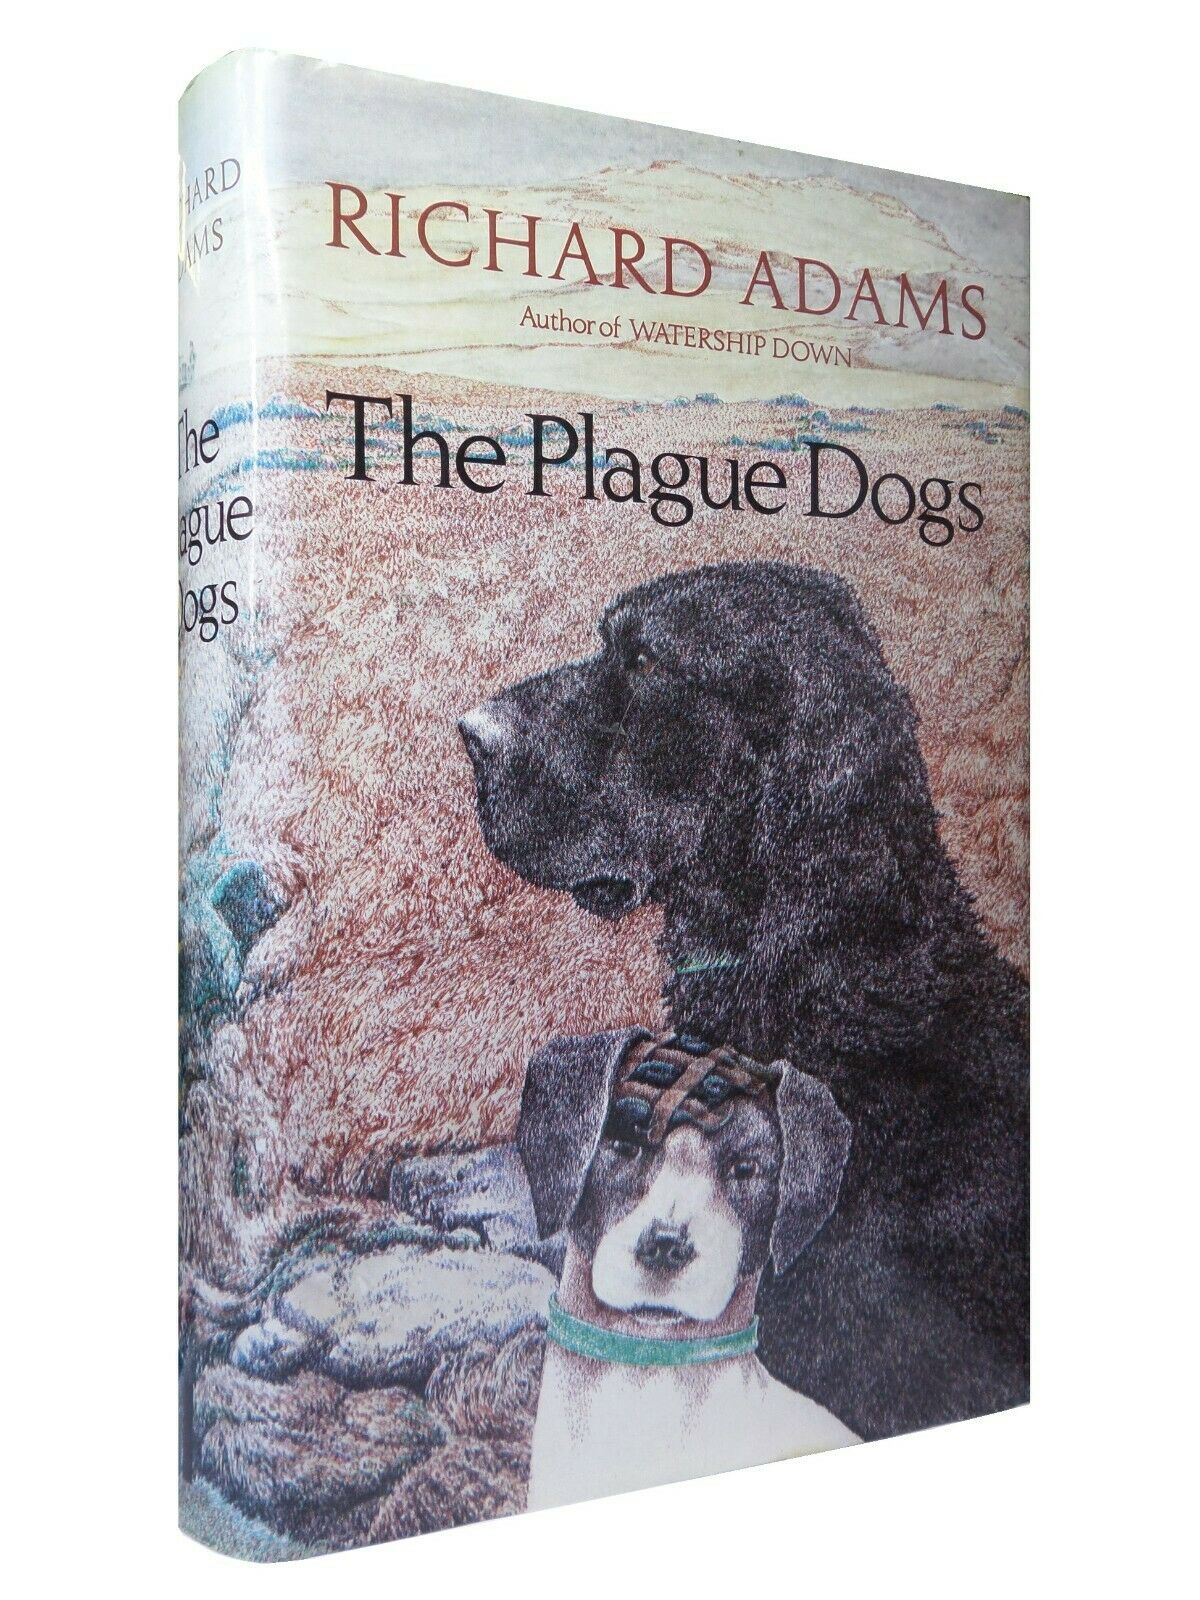 THE PLAGUE DOGS BY RICHARD ADAMS 1977 SIGNED & INSCRIBED FIRST EDITION